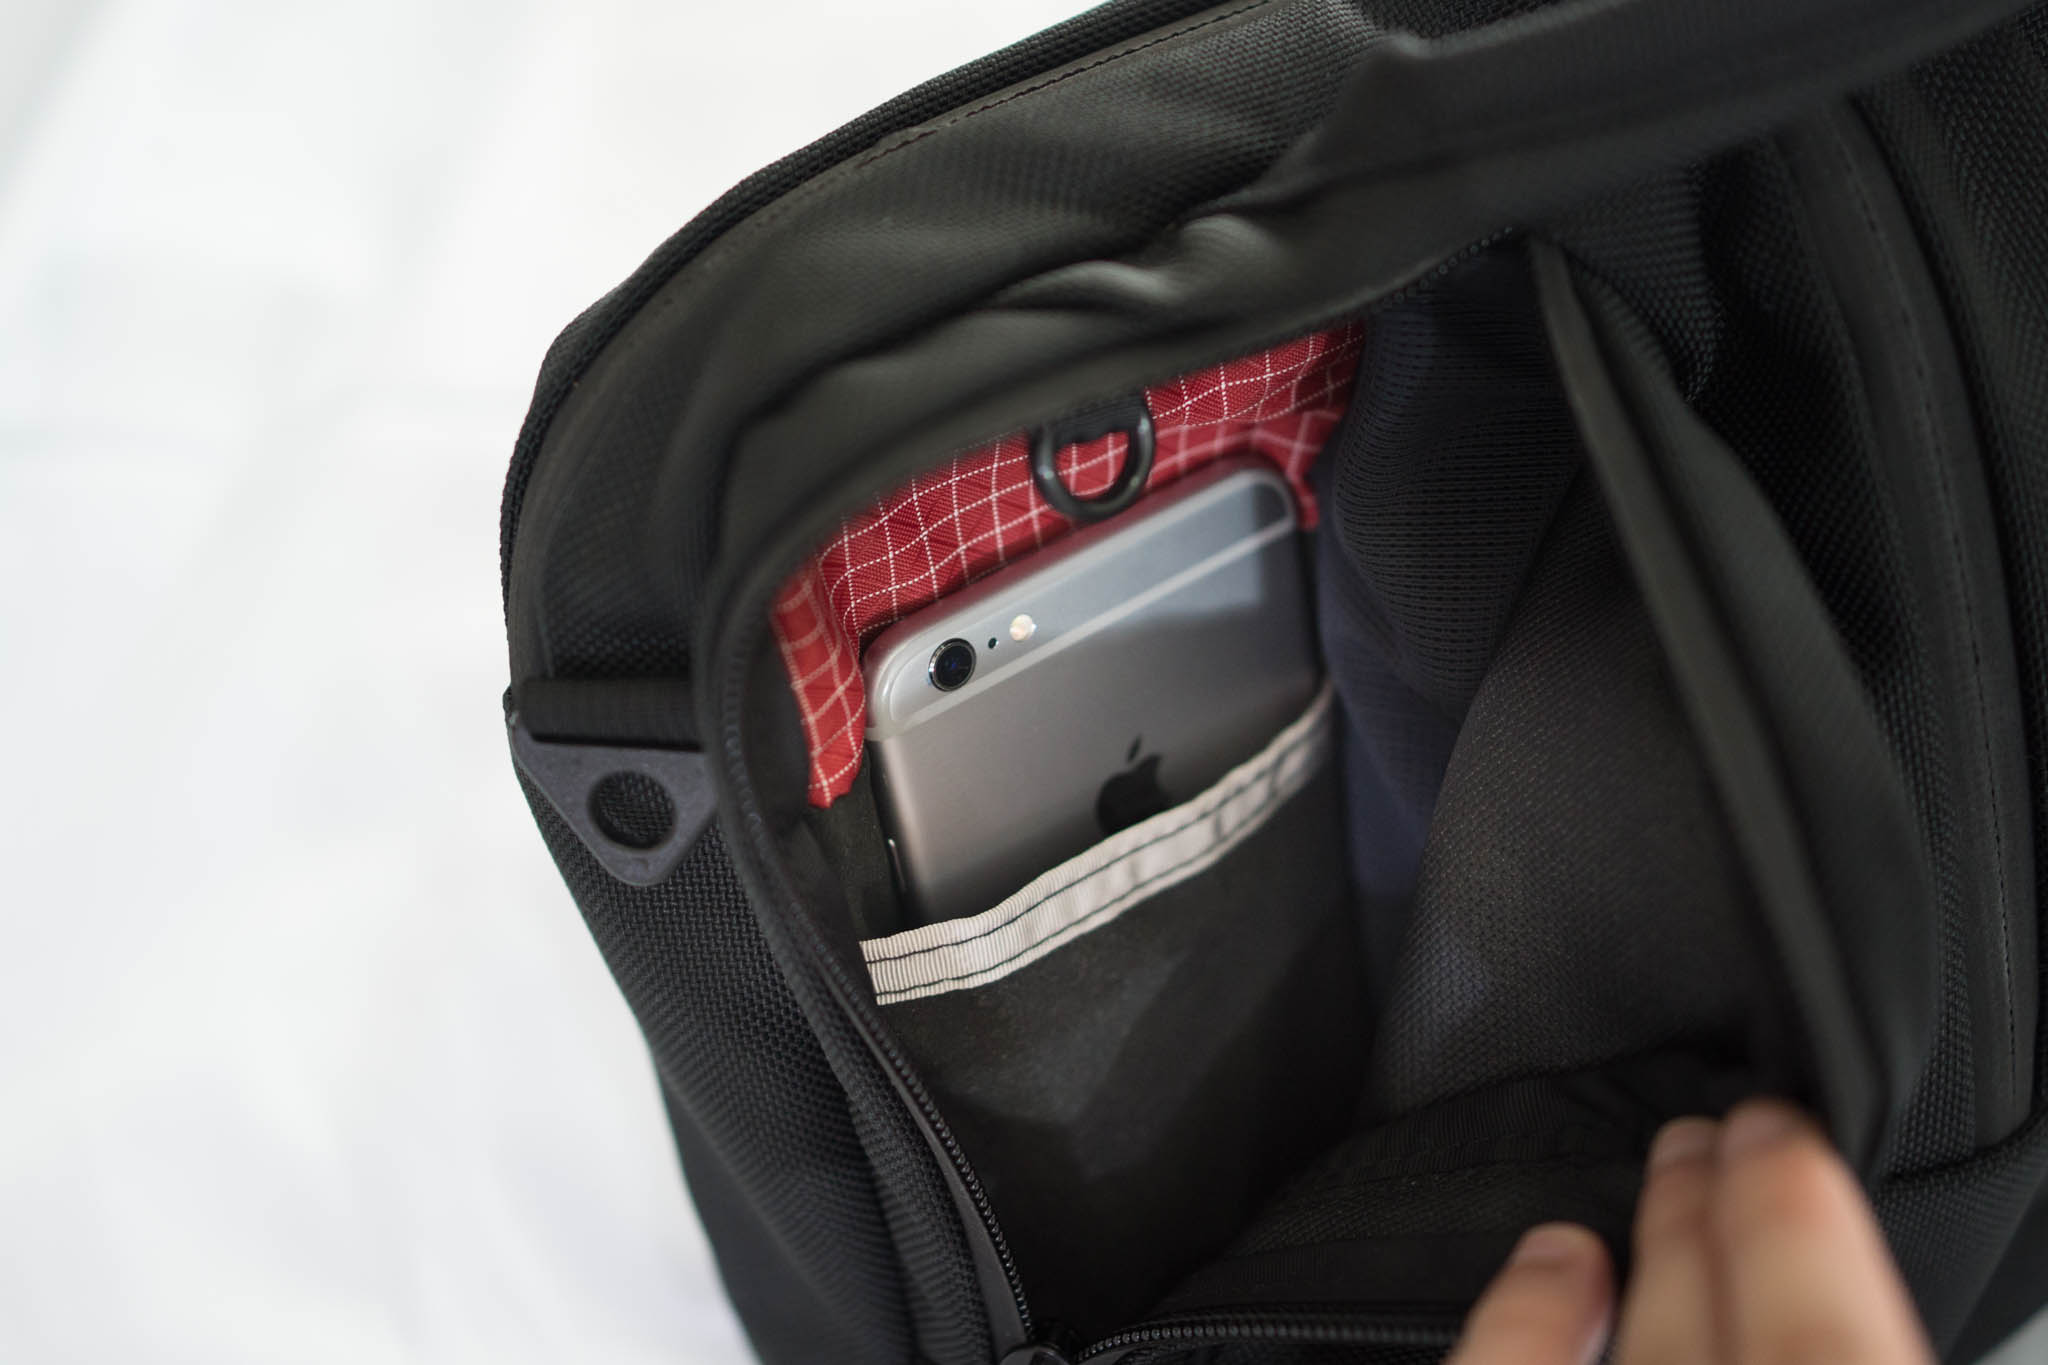 Tom Bihn's new Icon Messenger is for carrying all of your